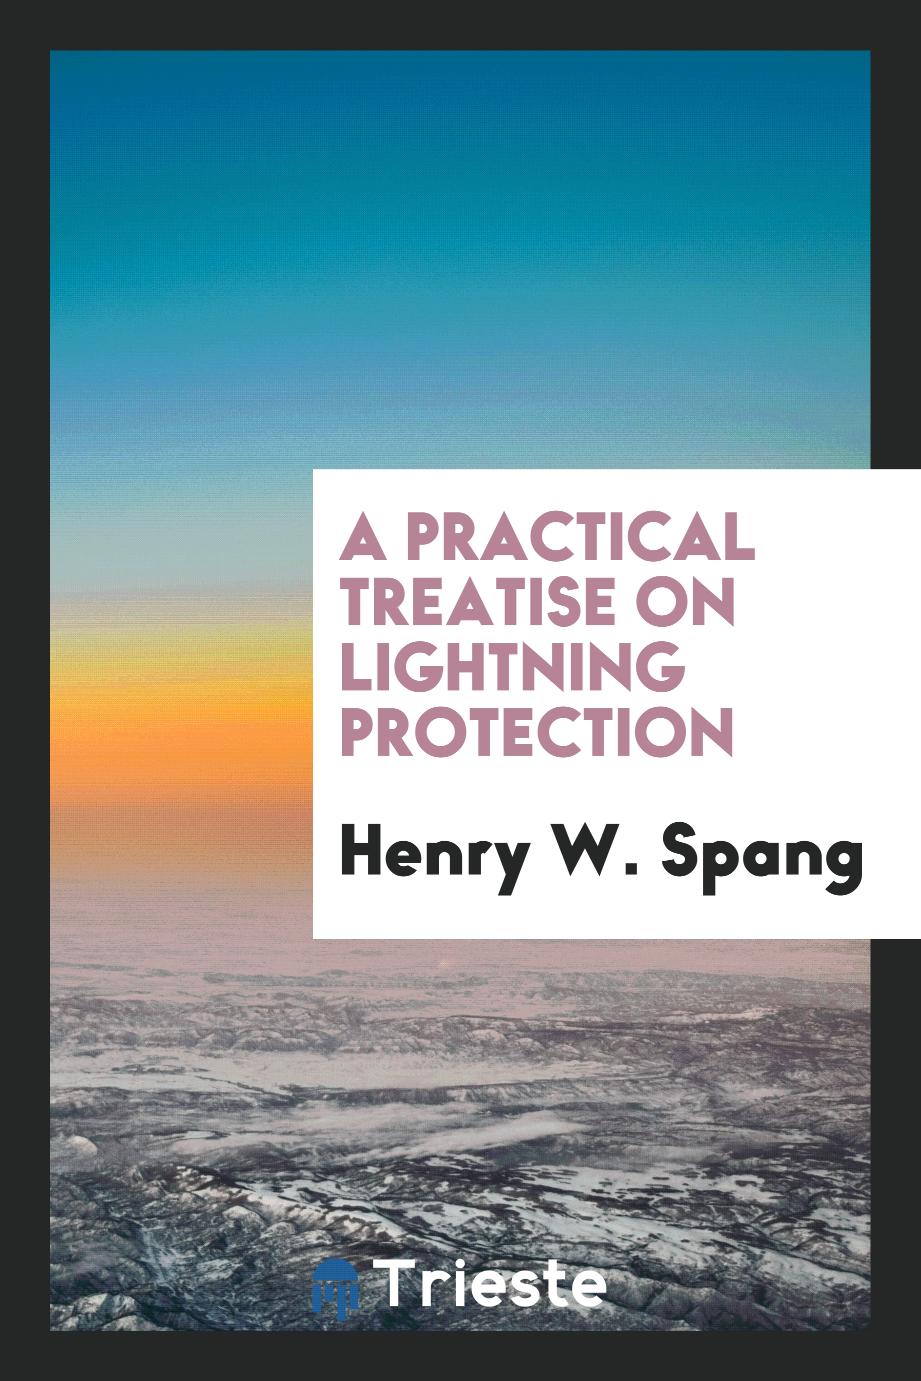 A Practical Treatise on Lightning Protection